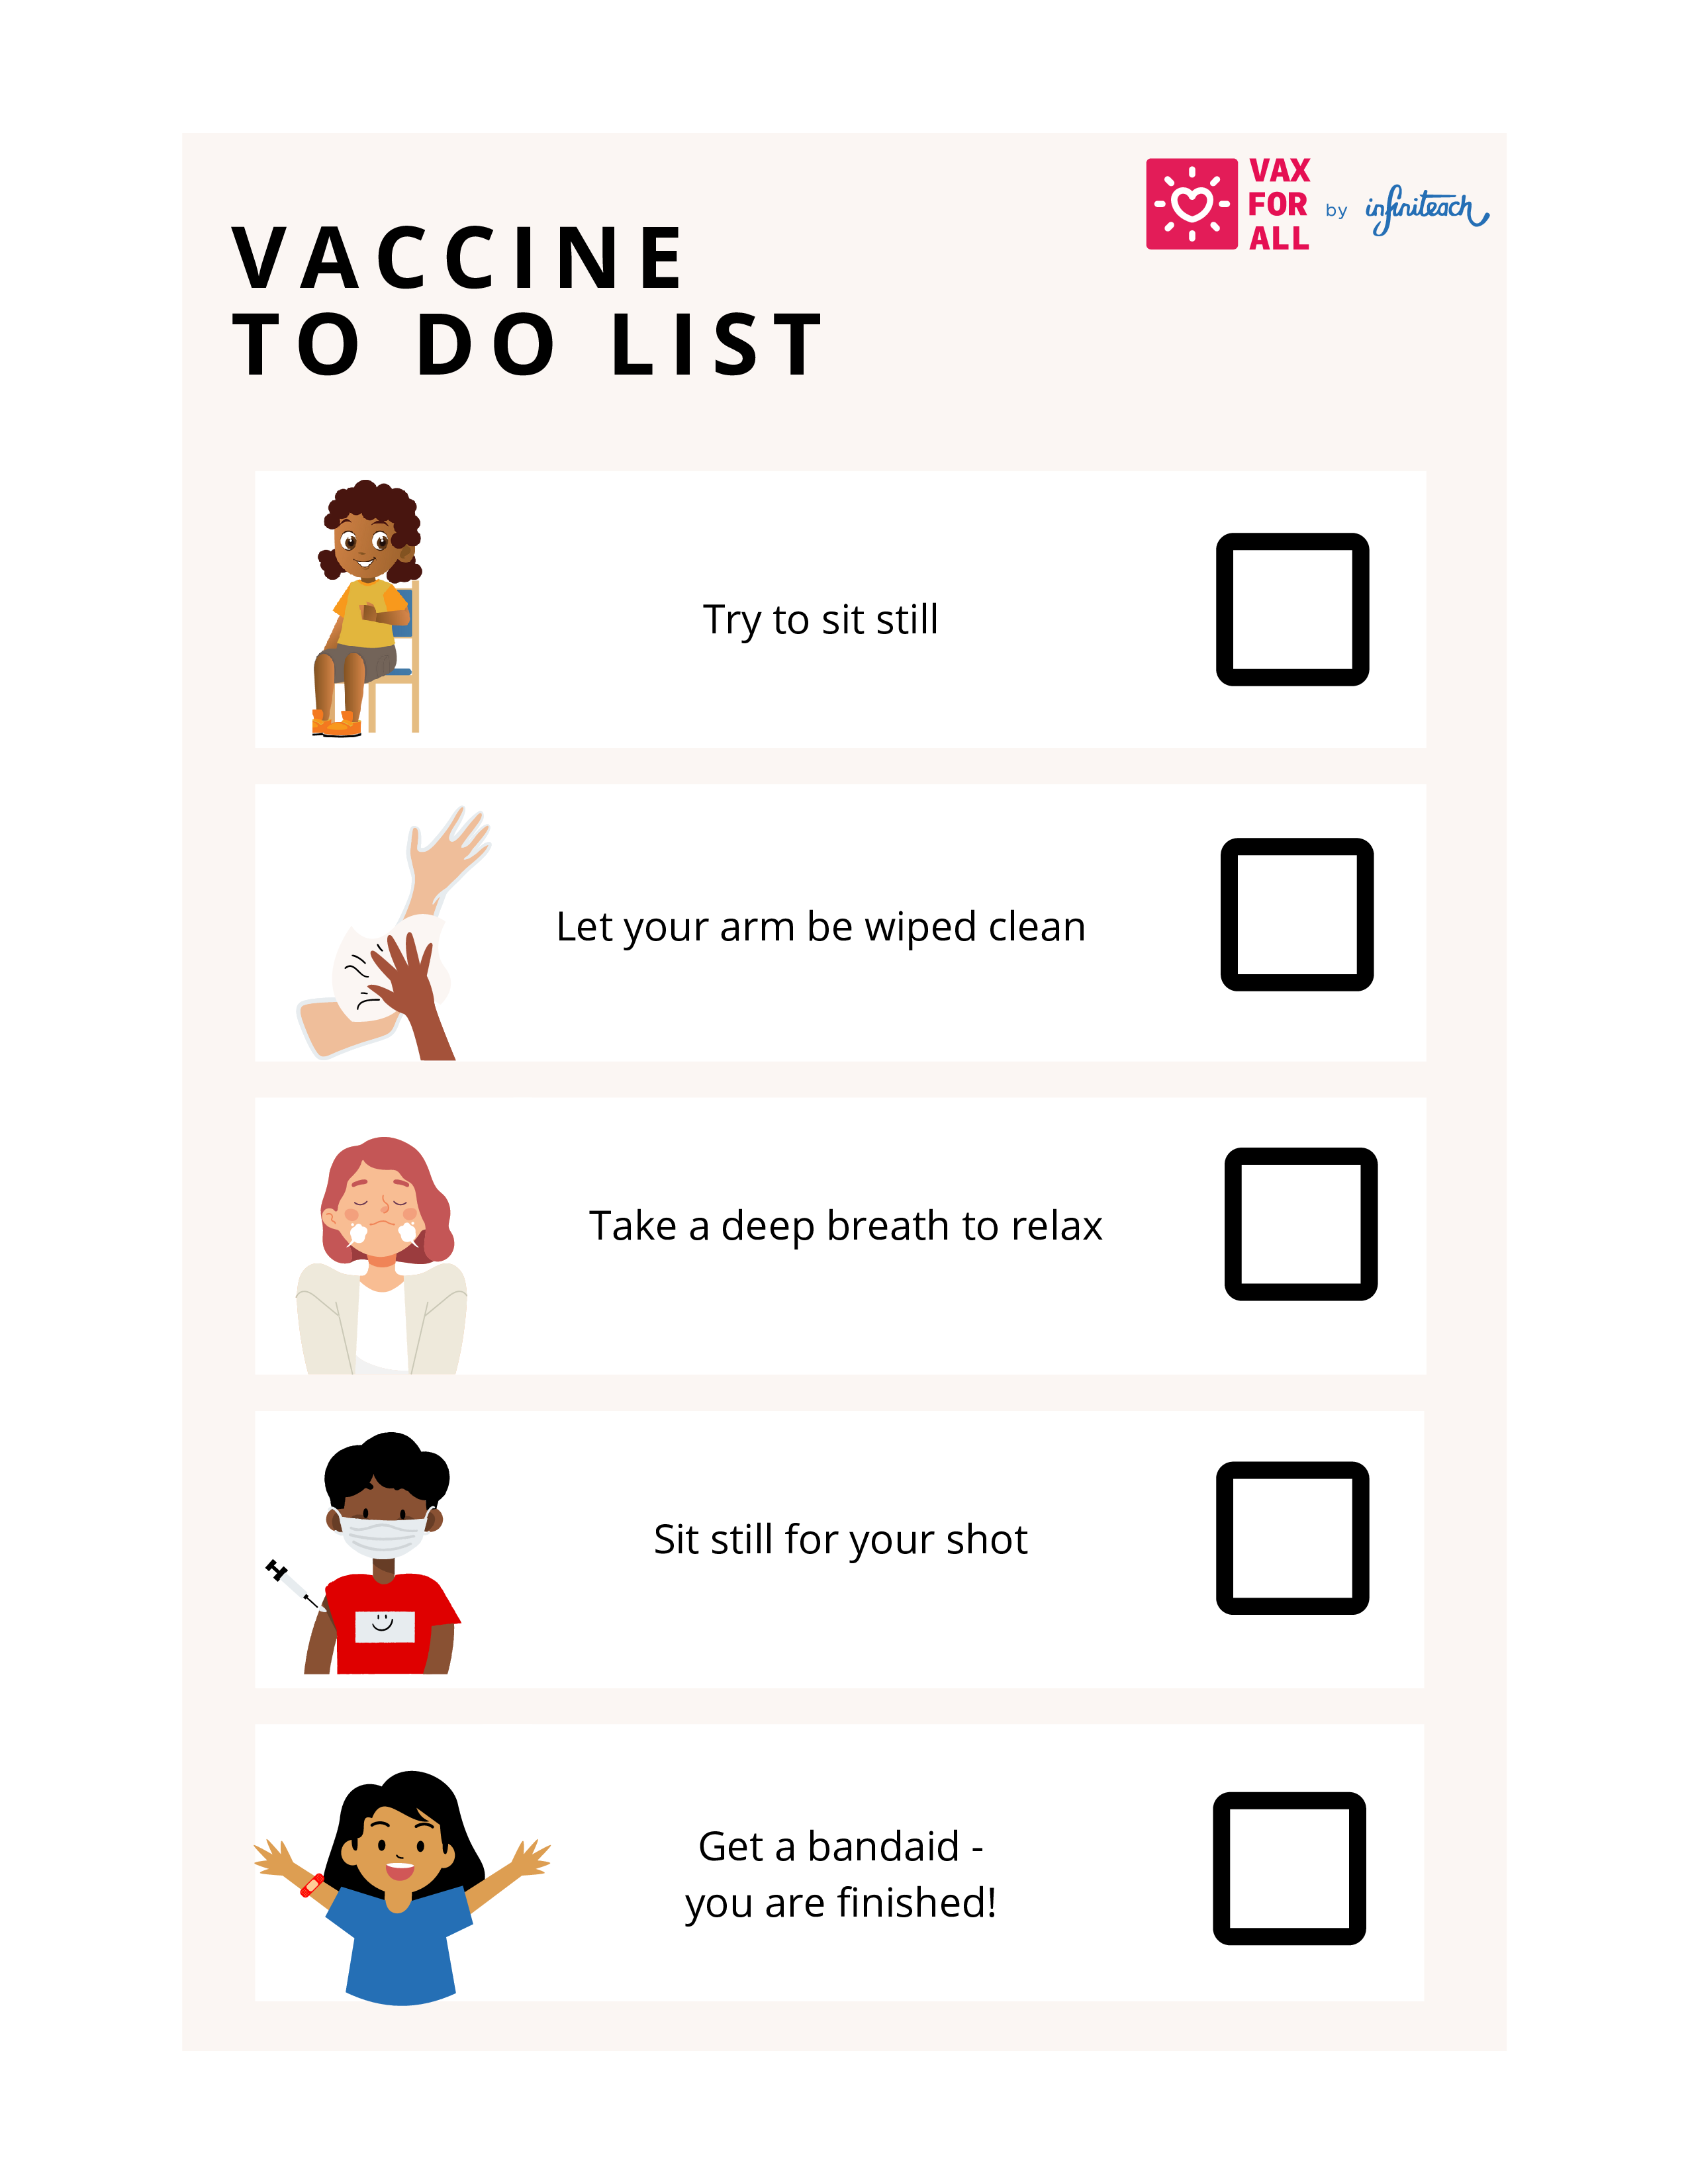 A checklist has cartoon icons next to each item on the list. The icons include a young Black girl sitting in a chair, an arm wiping off another arm, a young woman taking a deep breath, a Black child receiving a vaccine, and a young girl celebrating.